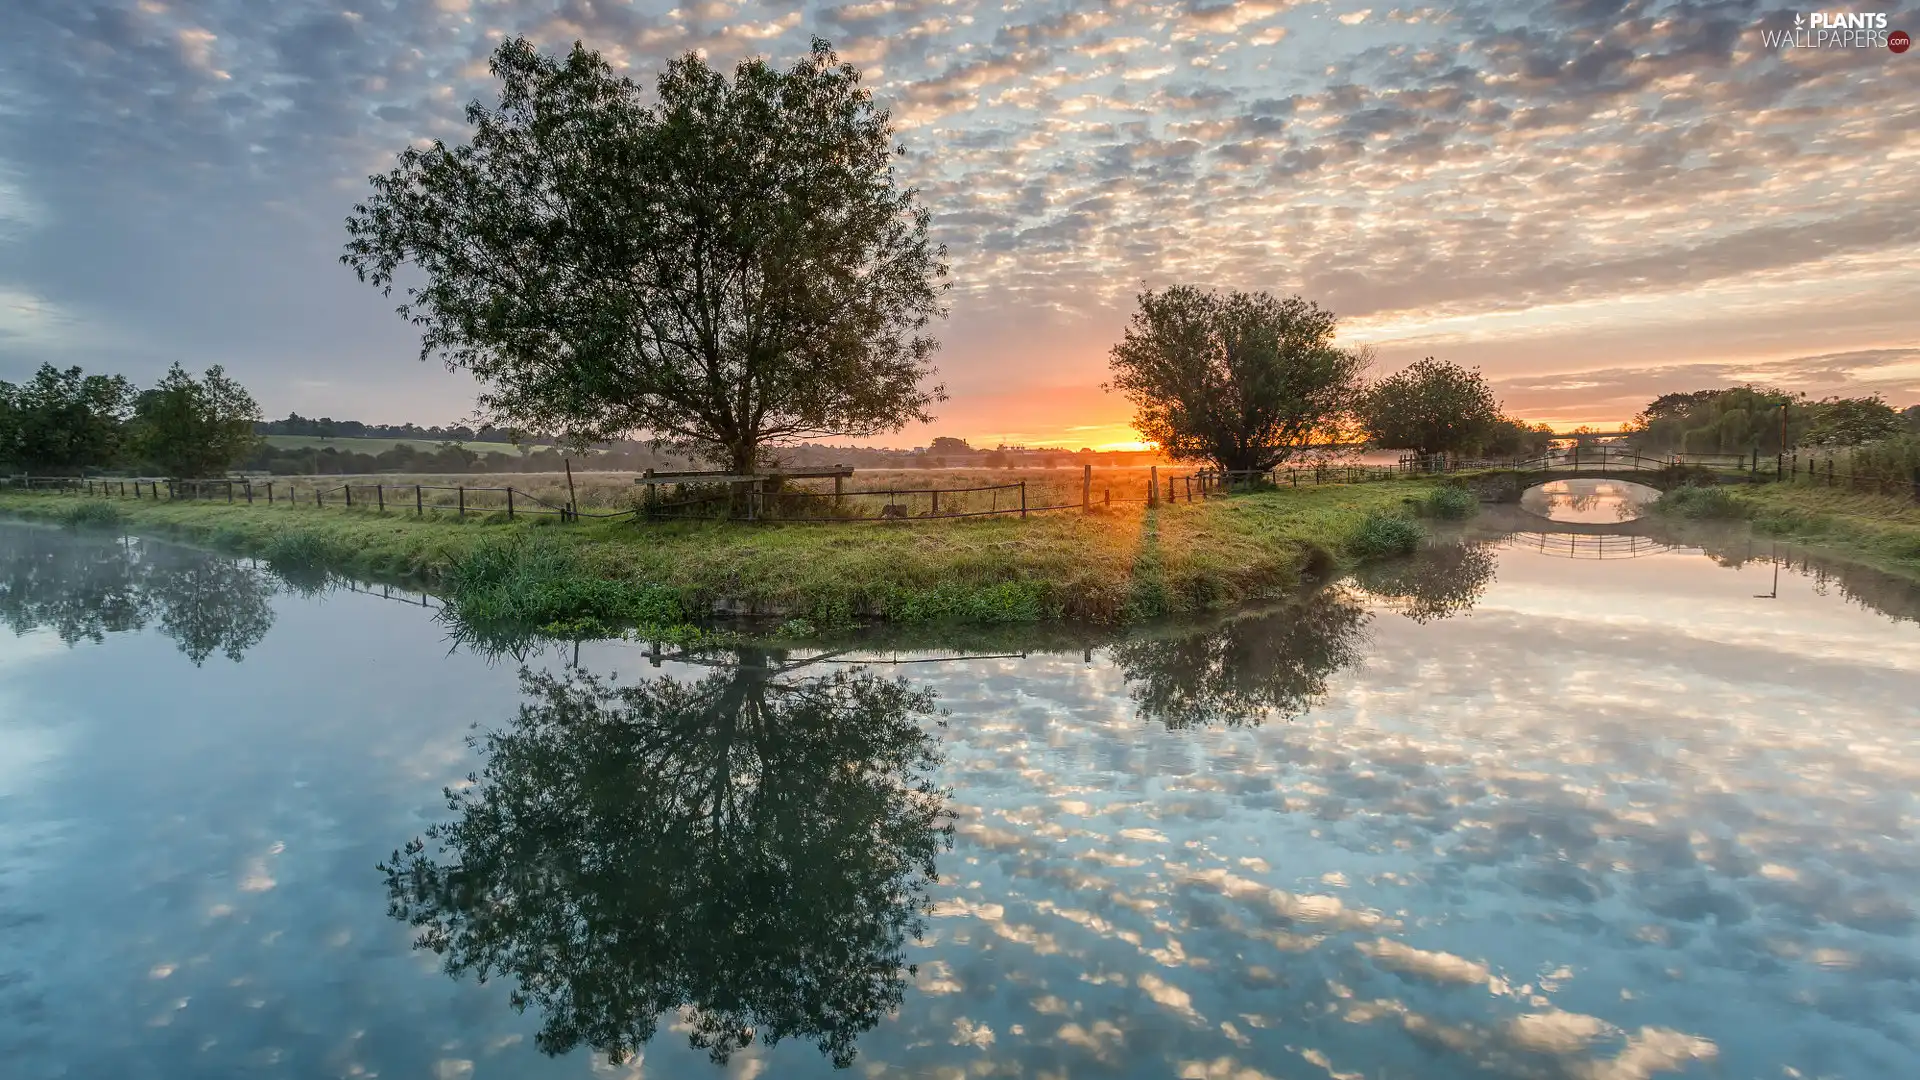 trees, River, clouds, reflection, viewes, Great Sunsets